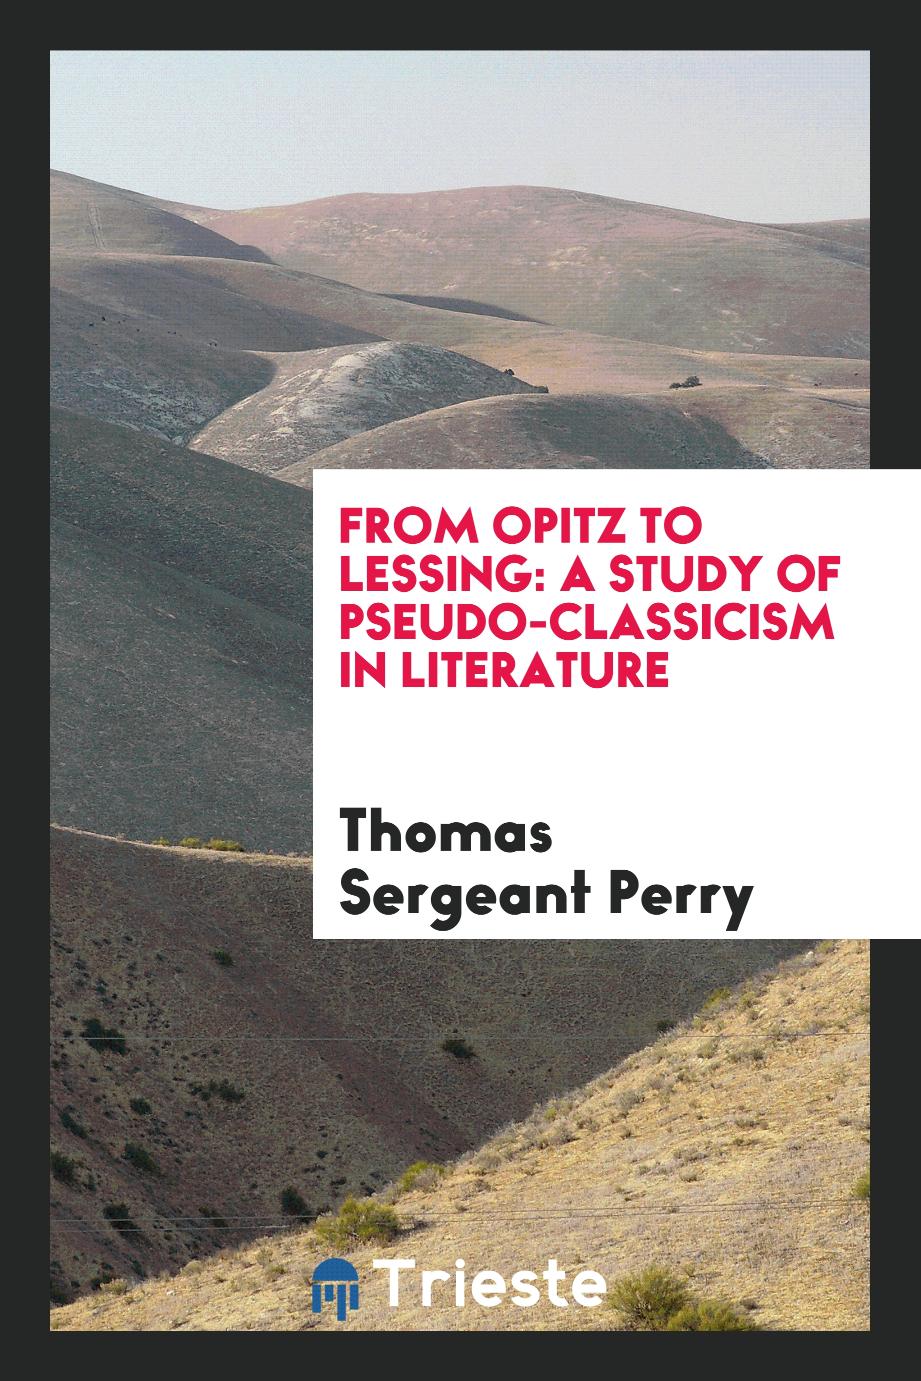 From Opitz to Lessing: a study of pseudo-classicism in literature